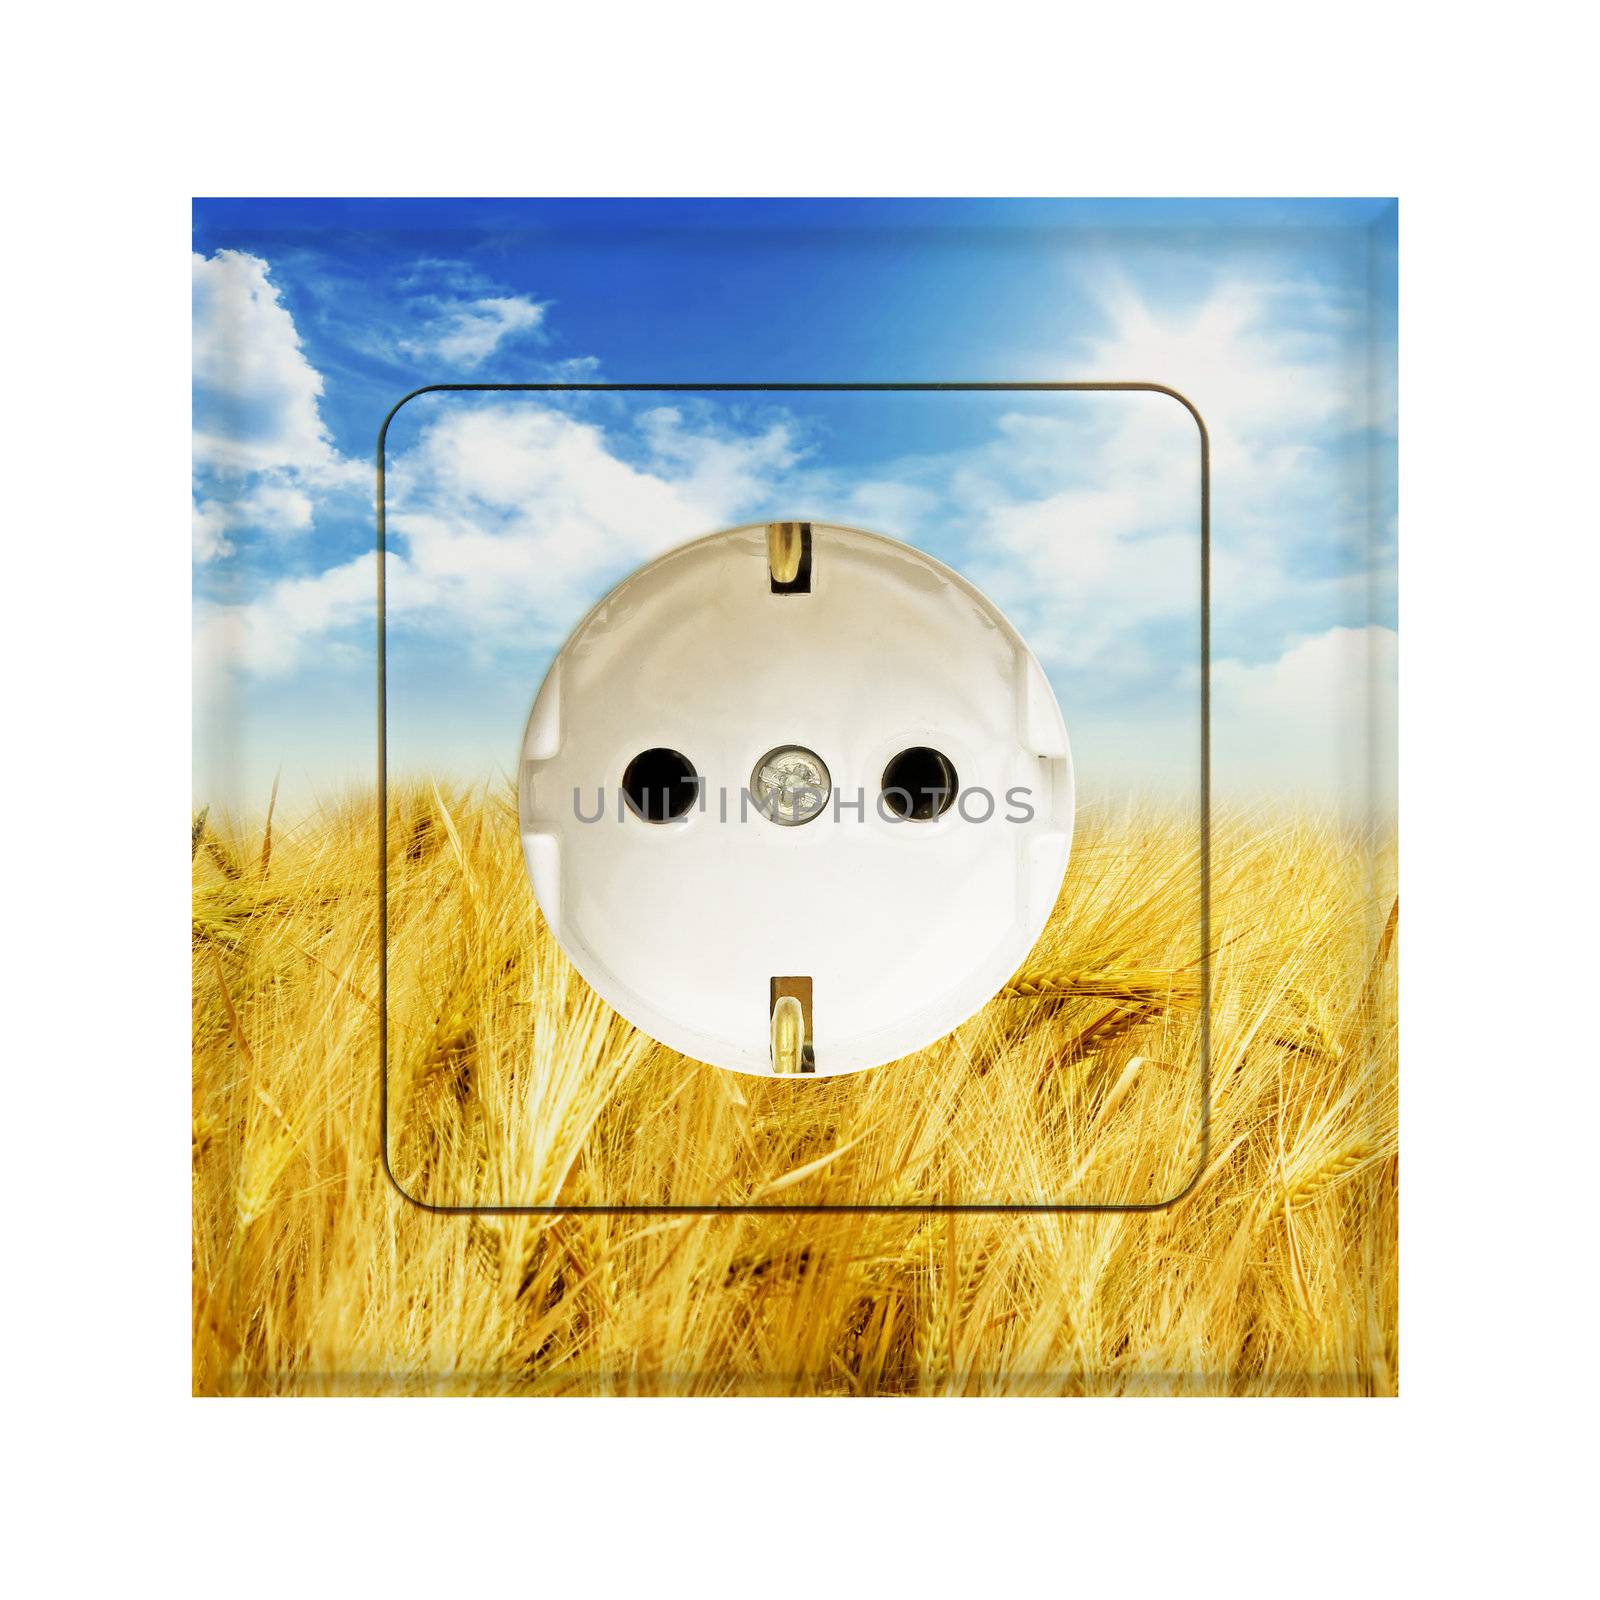 electric socket combined with a field and sky